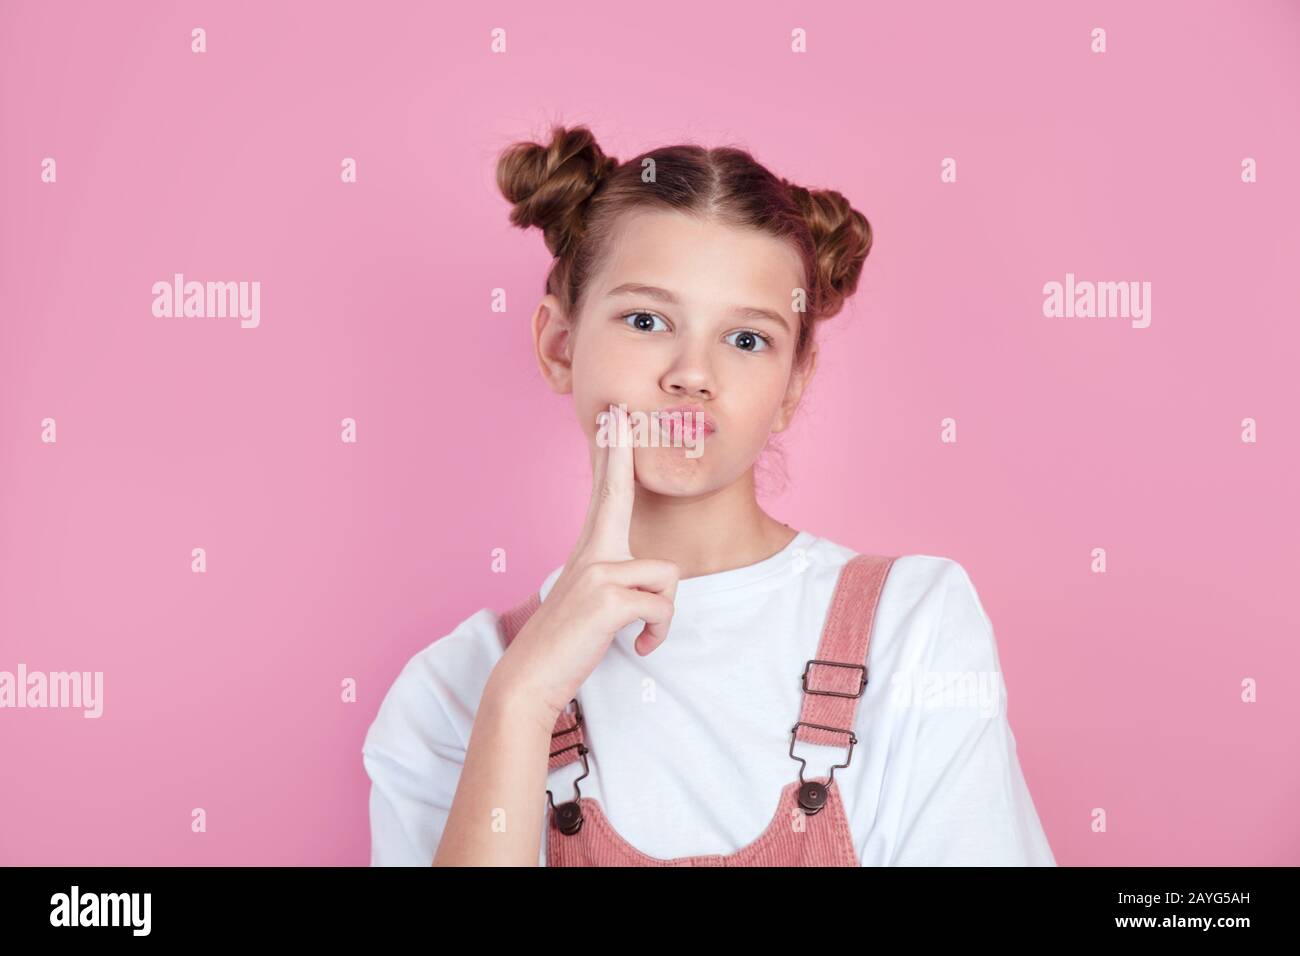 Cute girl puffed cheeks and having a funny face on pink background. Stock Photo